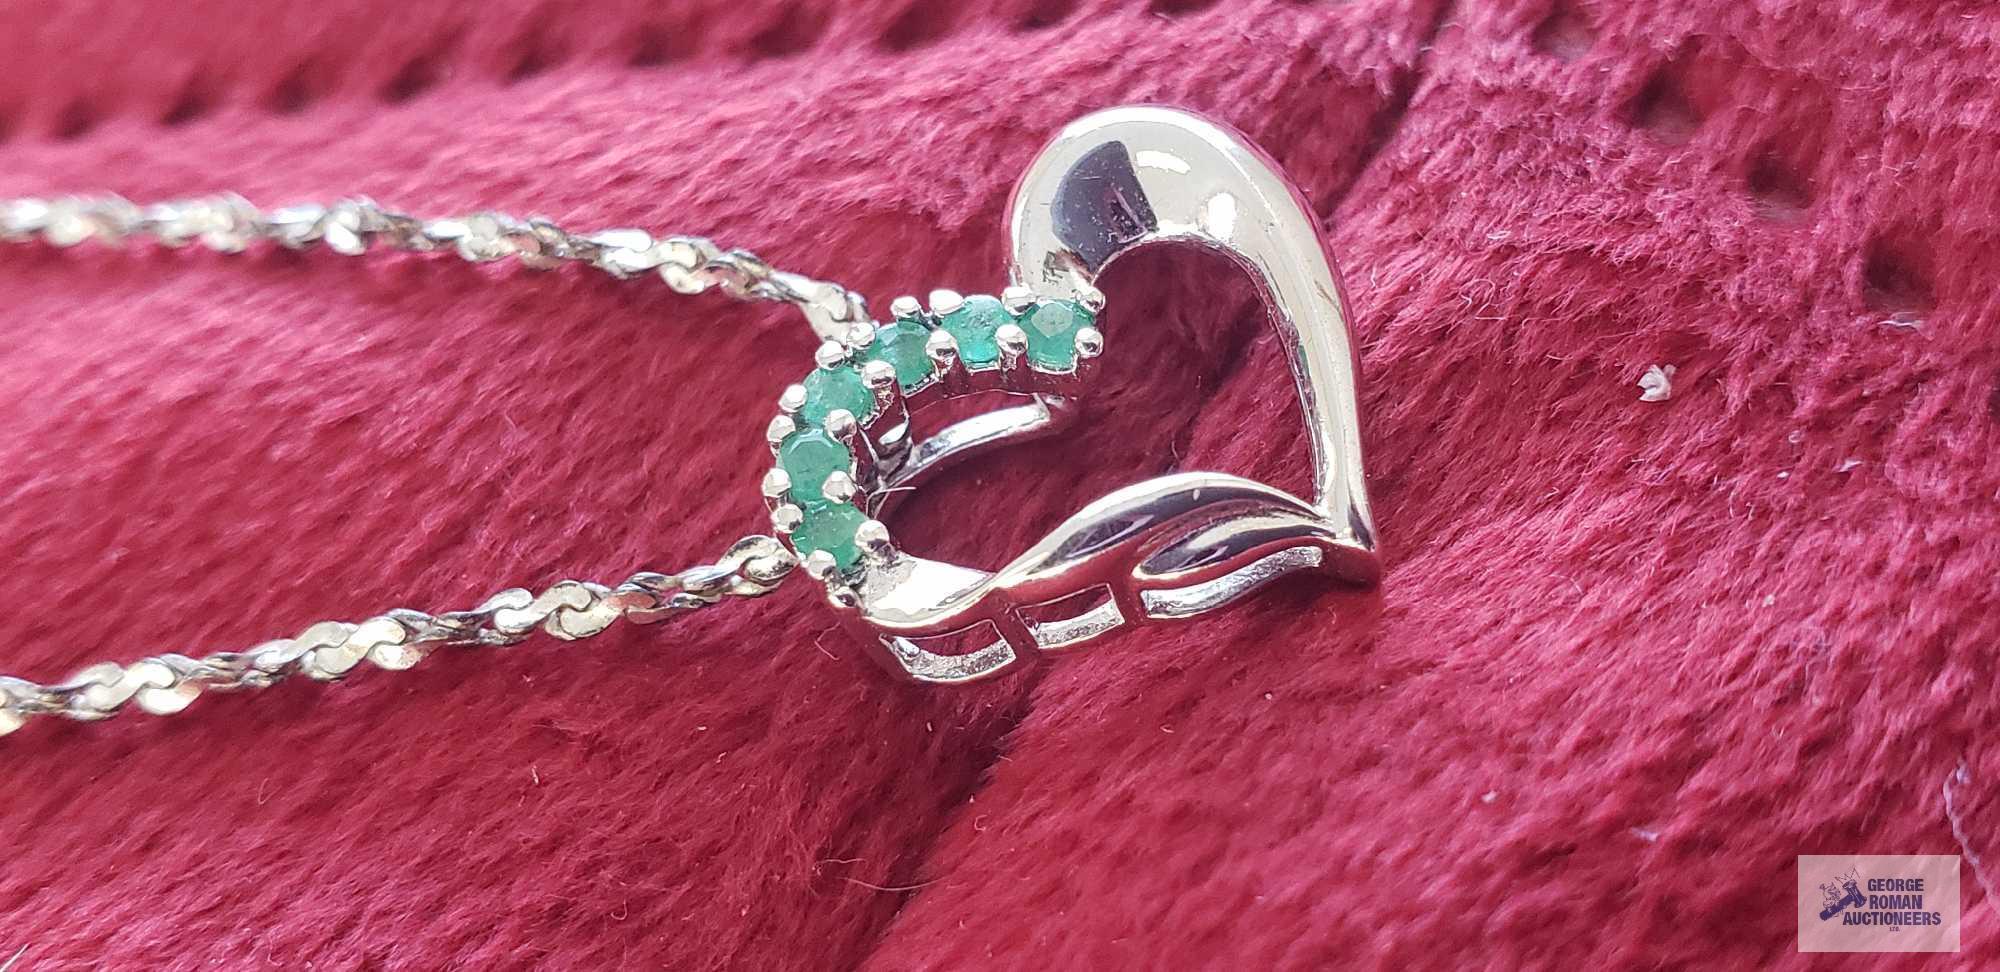 Silver colored heart-shaped pendant with green gemstones, marked 925, on silver colored twist